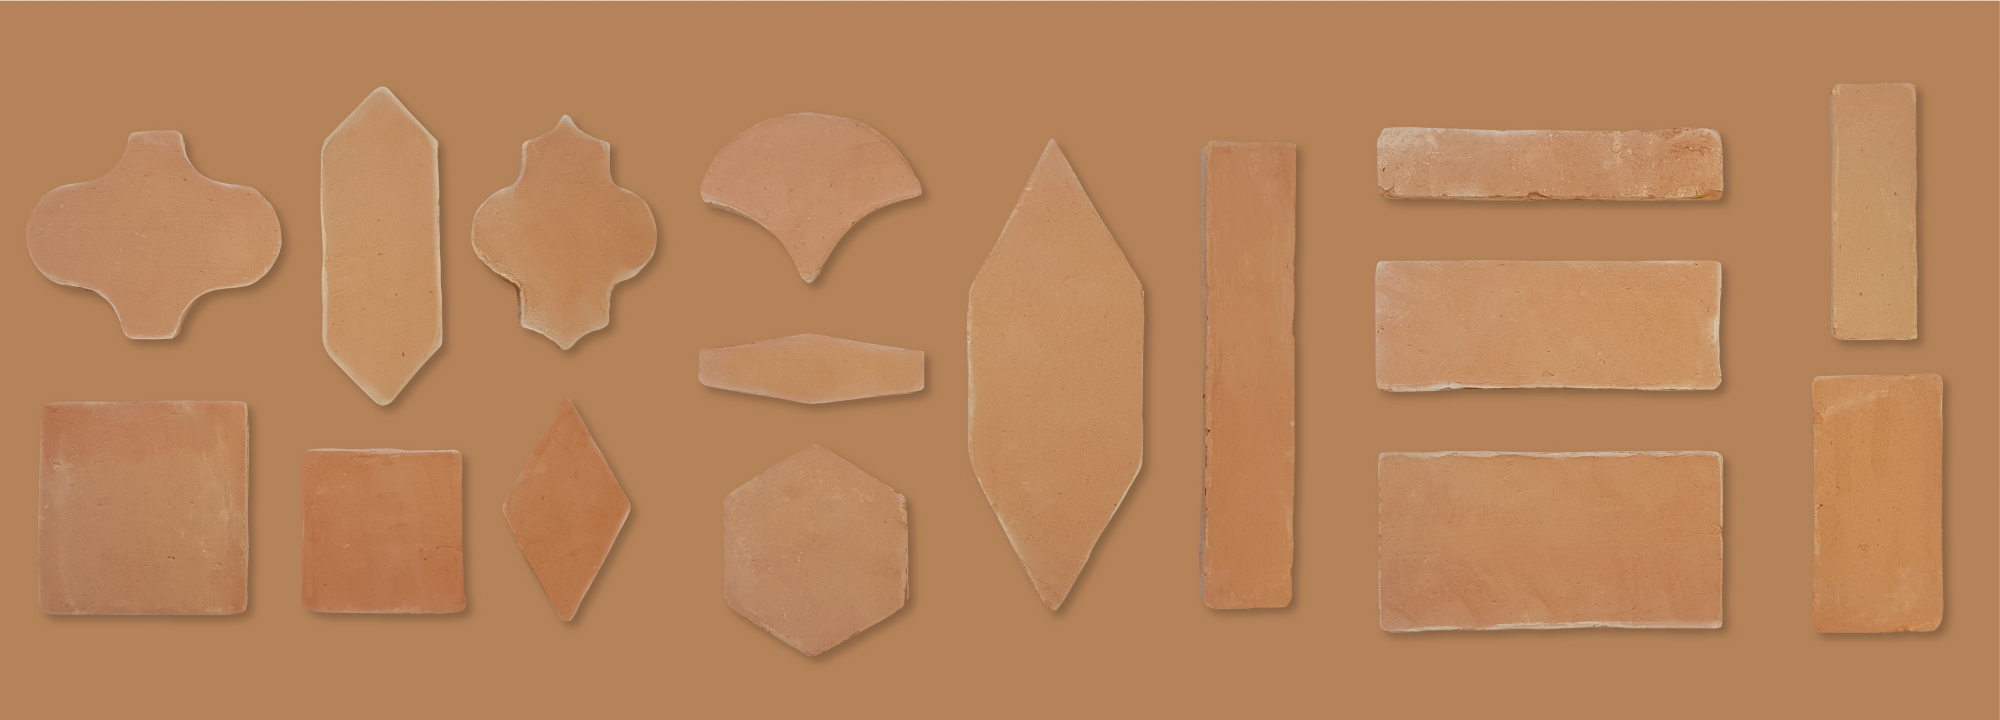 Bespoke projects :: Alteret Ceramicas. Handmade Terracotta and Wall Tiles